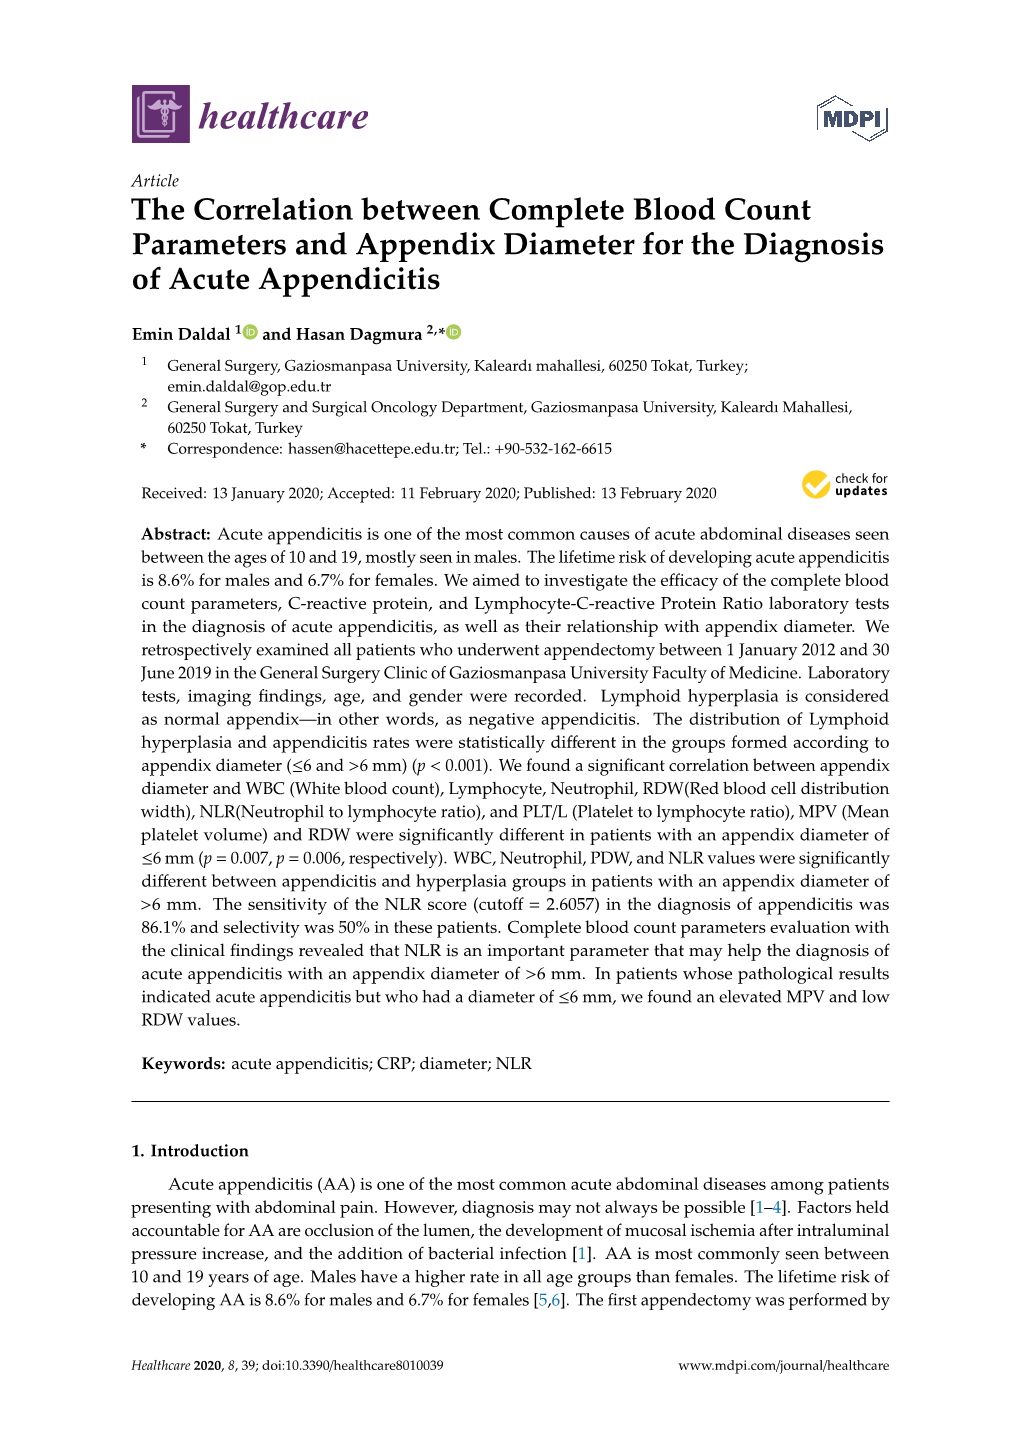 The Correlation Between Complete Blood Count Parameters and Appendix Diameter for the Diagnosis of Acute Appendicitis